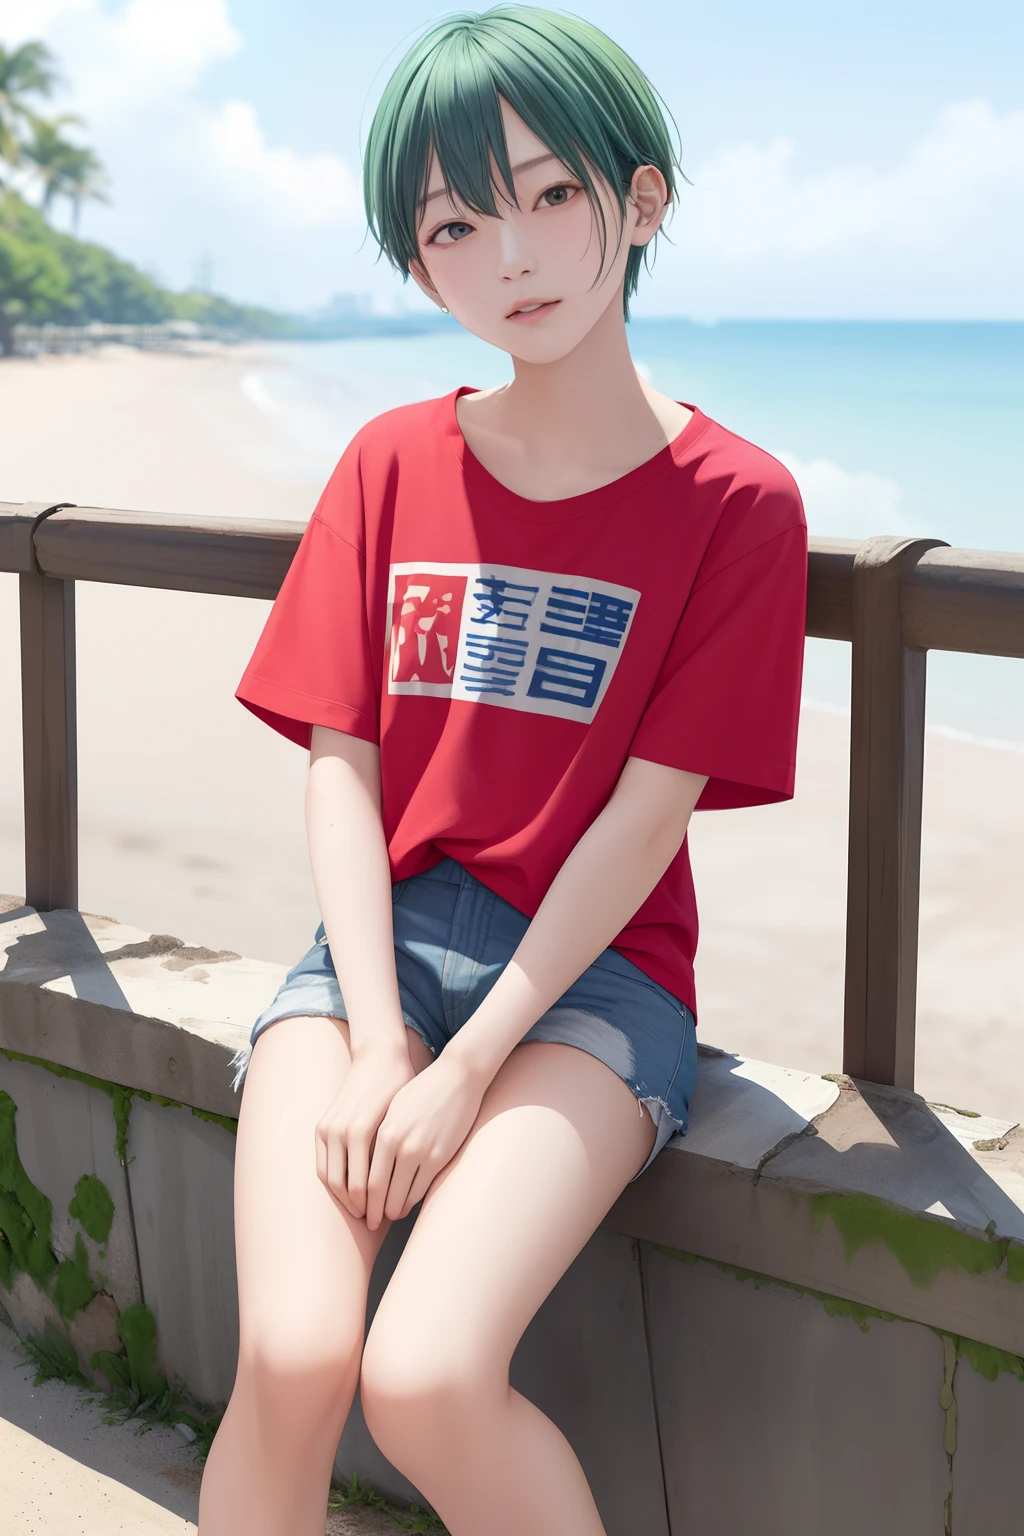 FULL BODYSHOT、an oil painting、​masterpiece、top-quality、hight resolution、green and blue hair、Very Shorthair、Red T-shirt、Short sleeve T-shirt、Union Jack Print T-Shirt、Small、Sweaty skin、shores、Beach、blue-sky、long and beautiful legs、Small eyes、Sauce order、Narrow-eyed、Clear look、Short、half-pants、Beach、Bored face、Bright red shirt、the tips of the hair are yellow